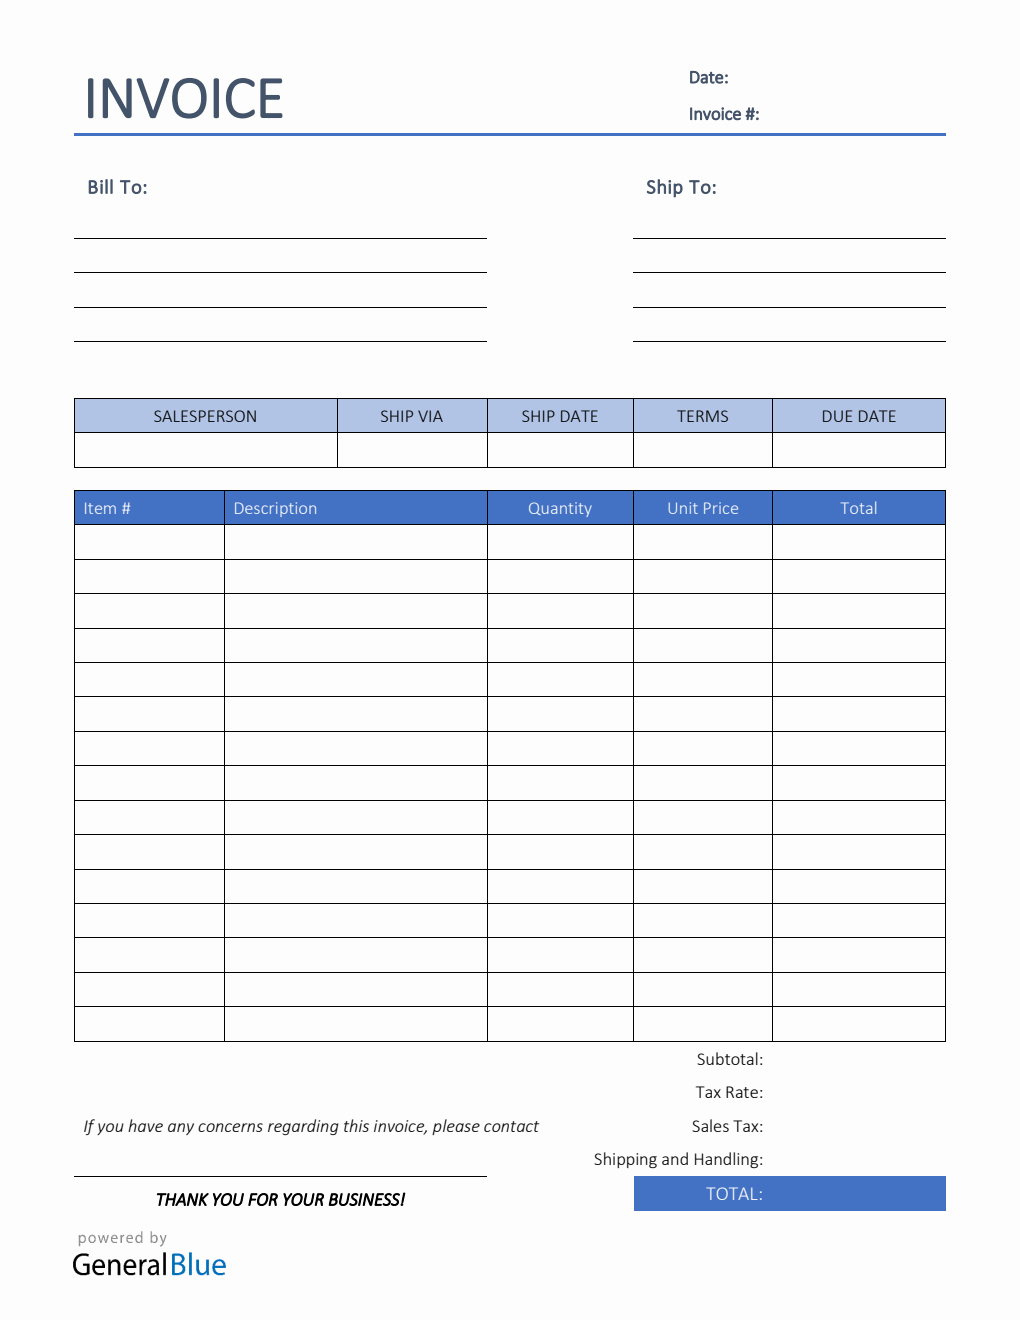 Sales Invoice Template in PDF (Colorful)